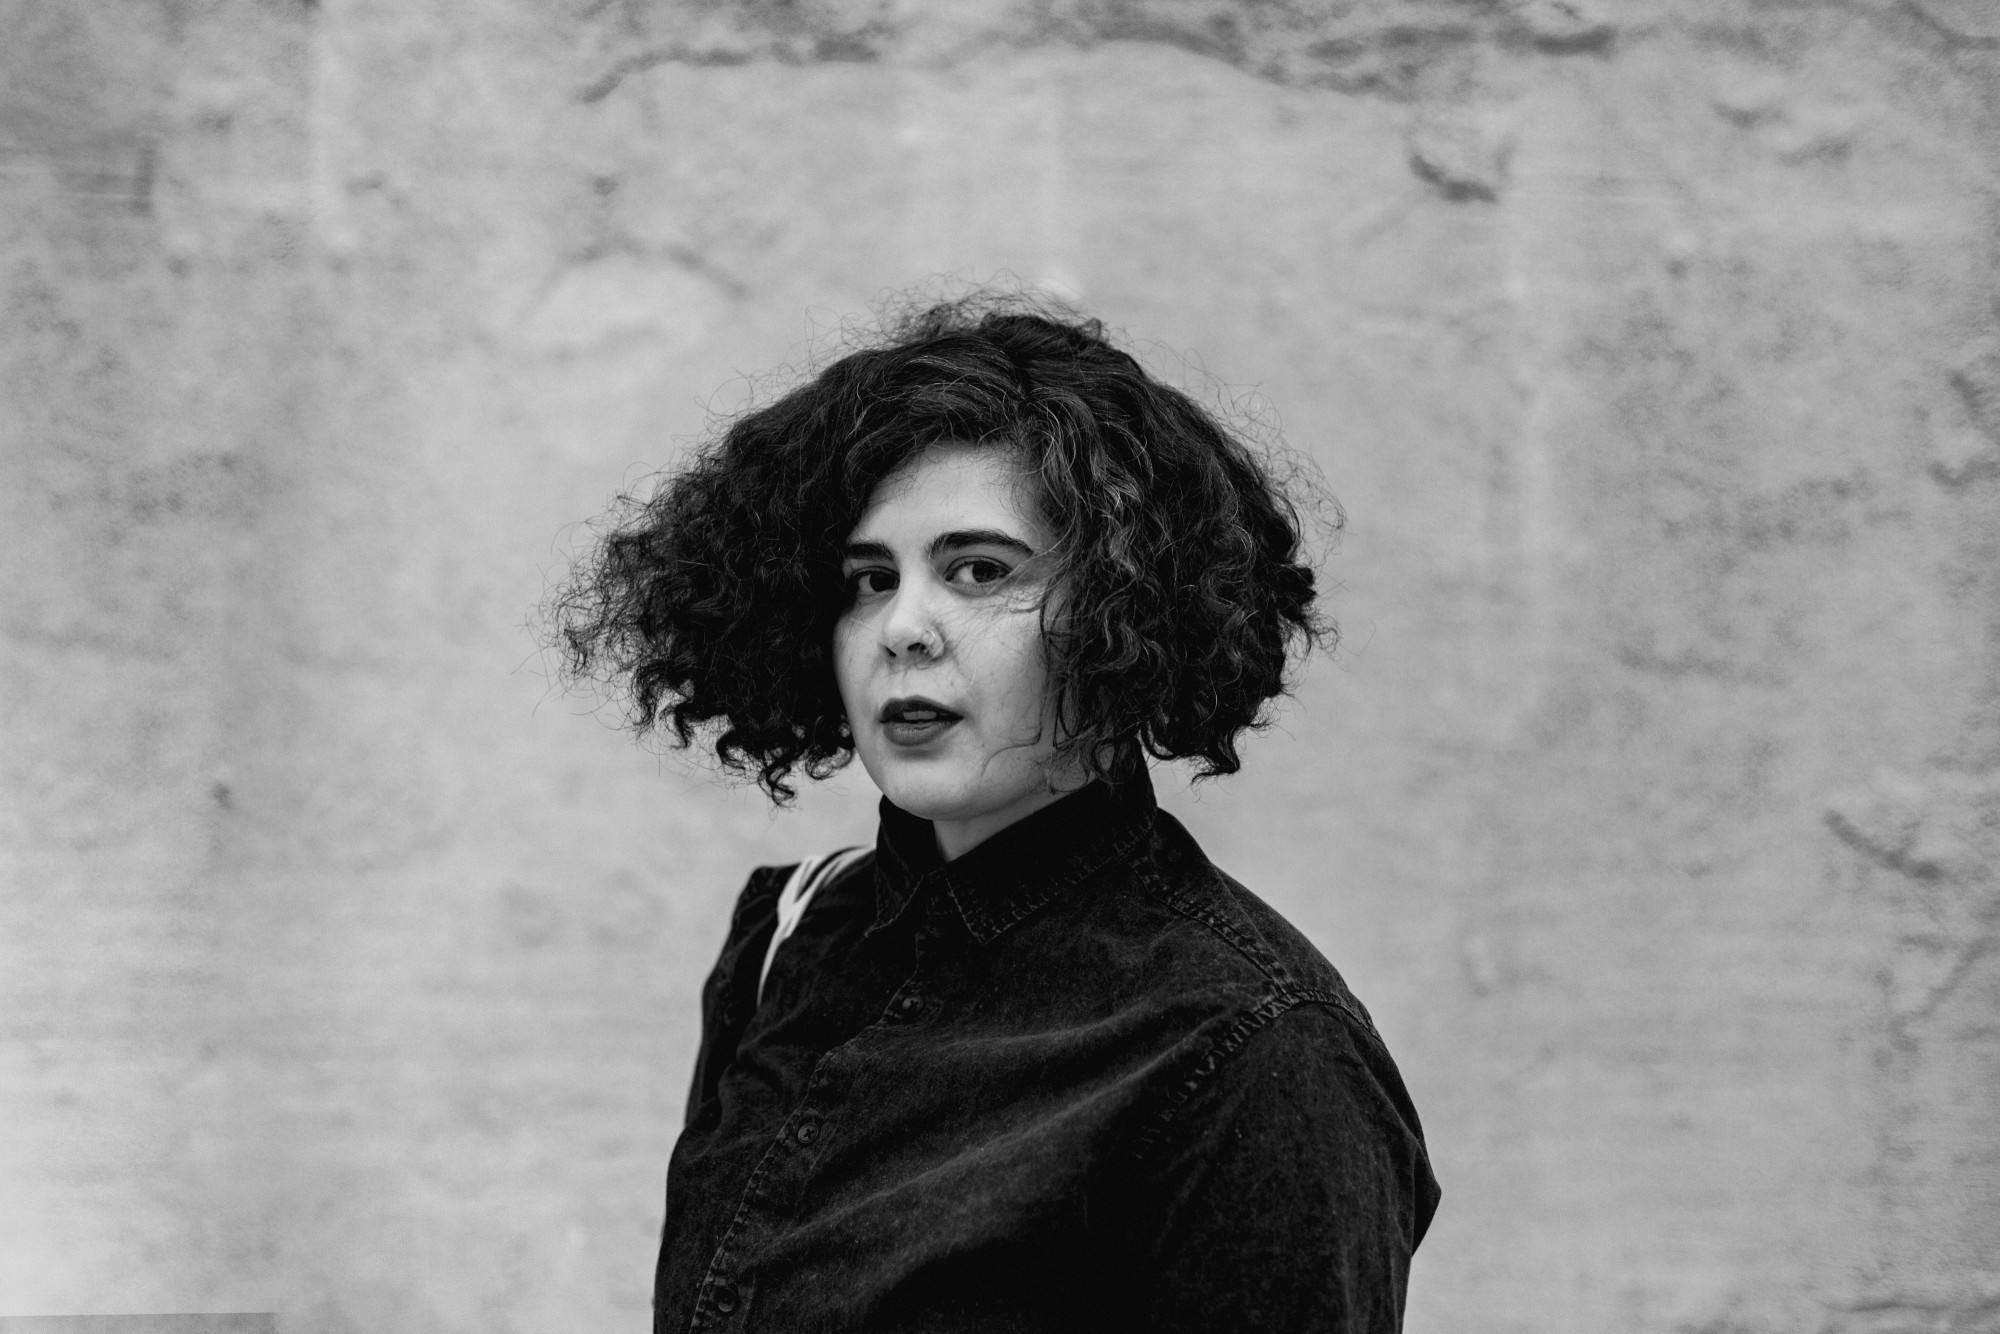 In this black and white portrait, Lara Mimosa Montes wears a dark button-up shirt and stands in front of a wall that looks like concrete, looking into the camera at an angle